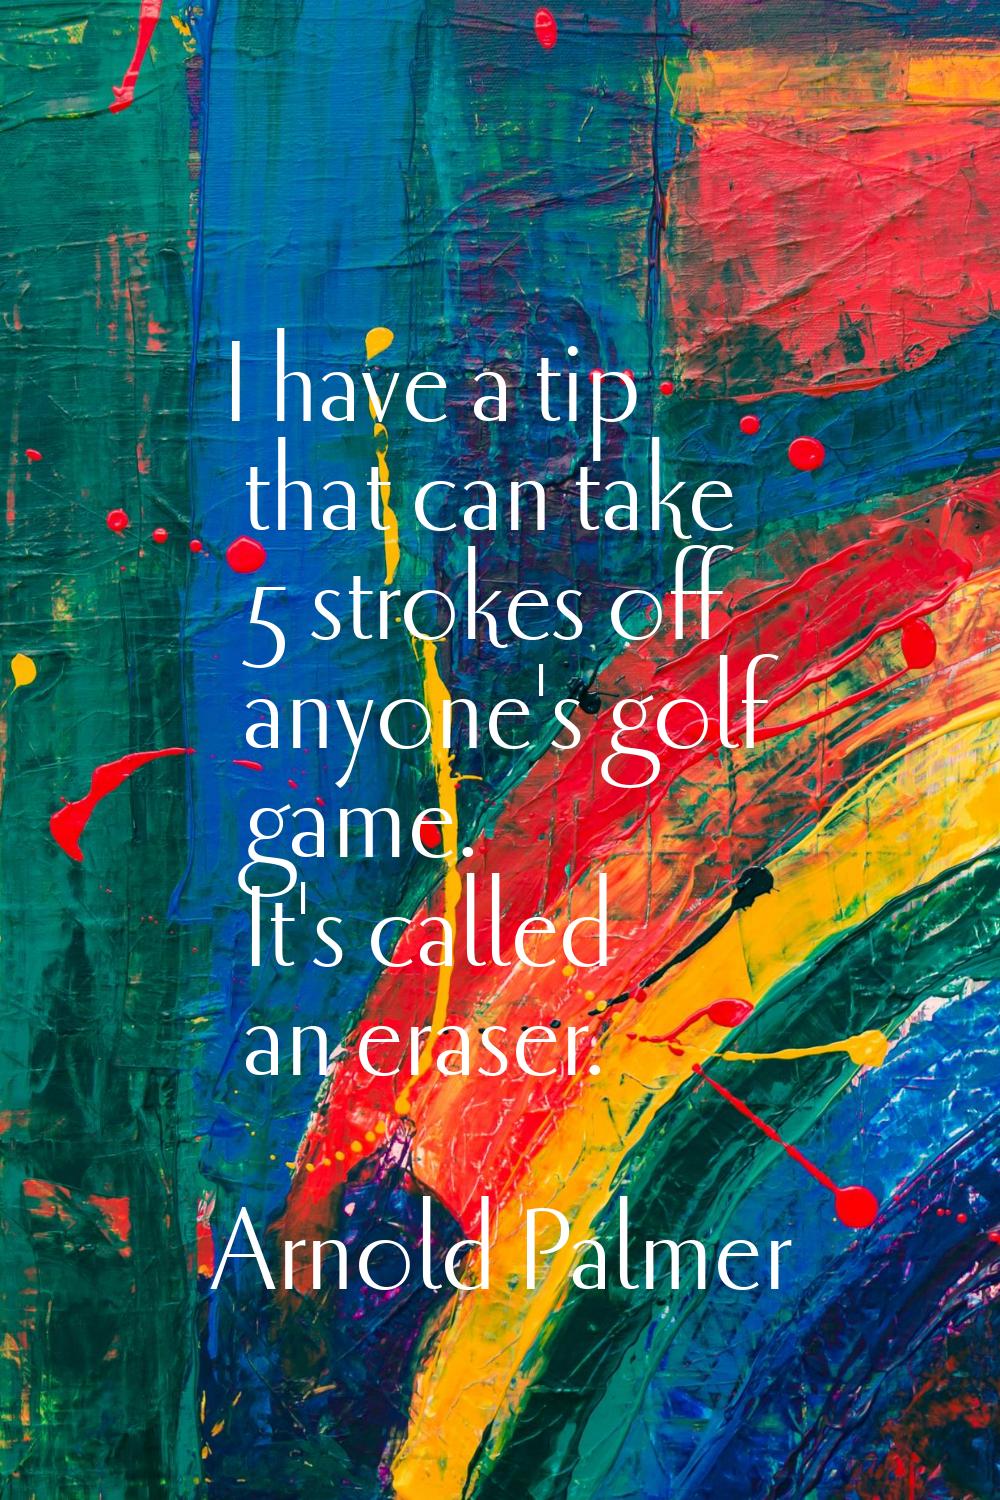 I have a tip that can take 5 strokes off anyone's golf game. It's called an eraser.